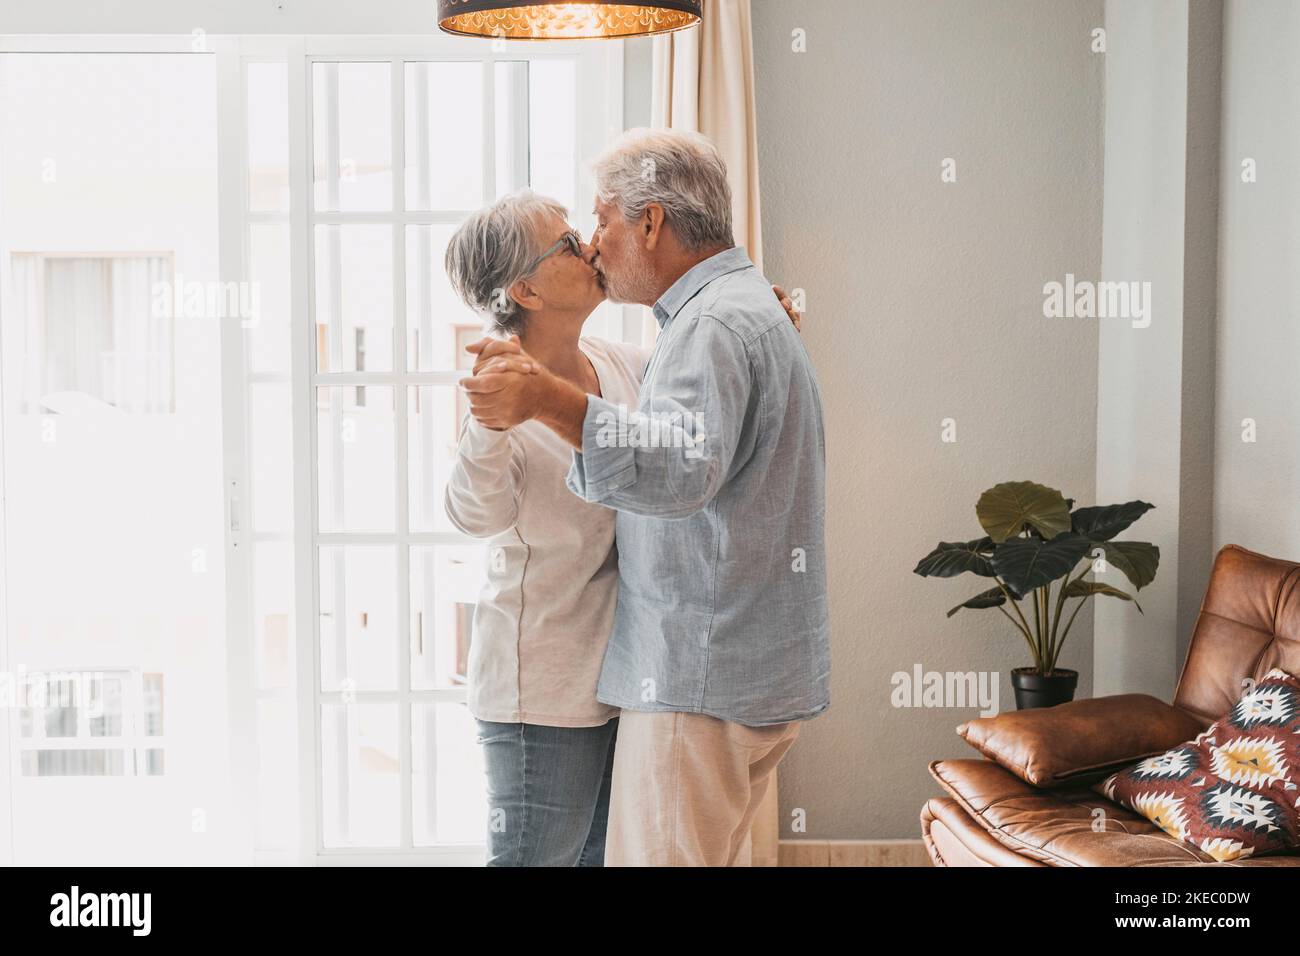 Romantic loving senior couple holding hands enjoying dancing together while kissing each other in the living room of house, couple kissing and embracing while holding hands together at home Stock Photo